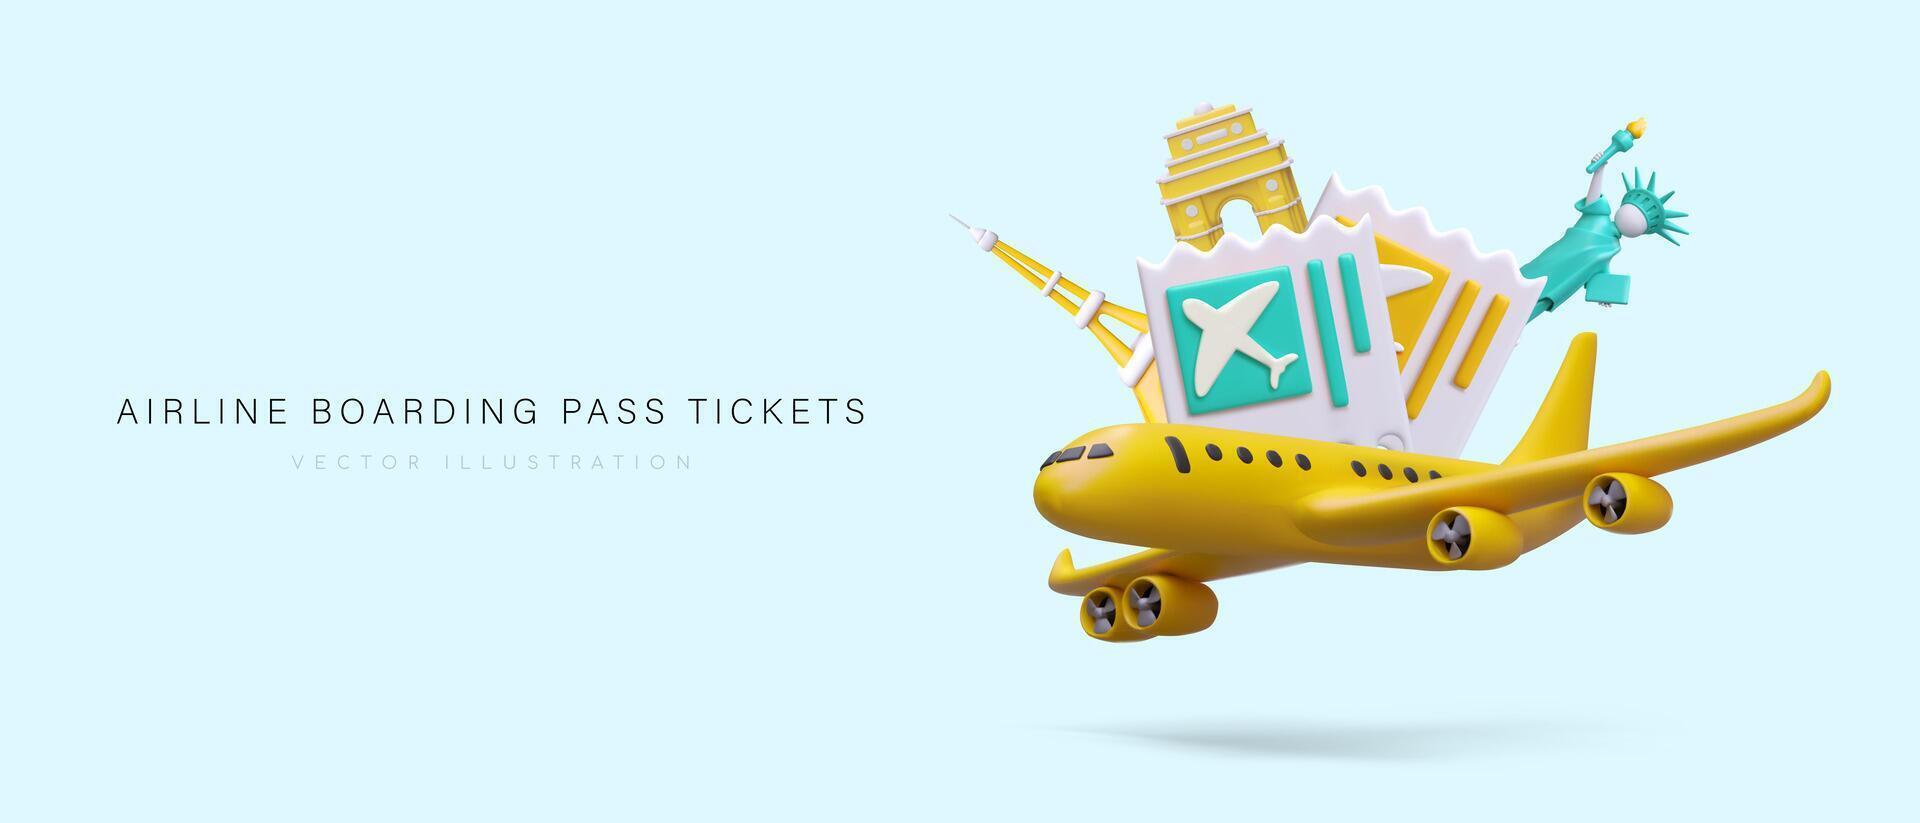 Airline boarding pass tickets. 3D plane with sights of different countries vector